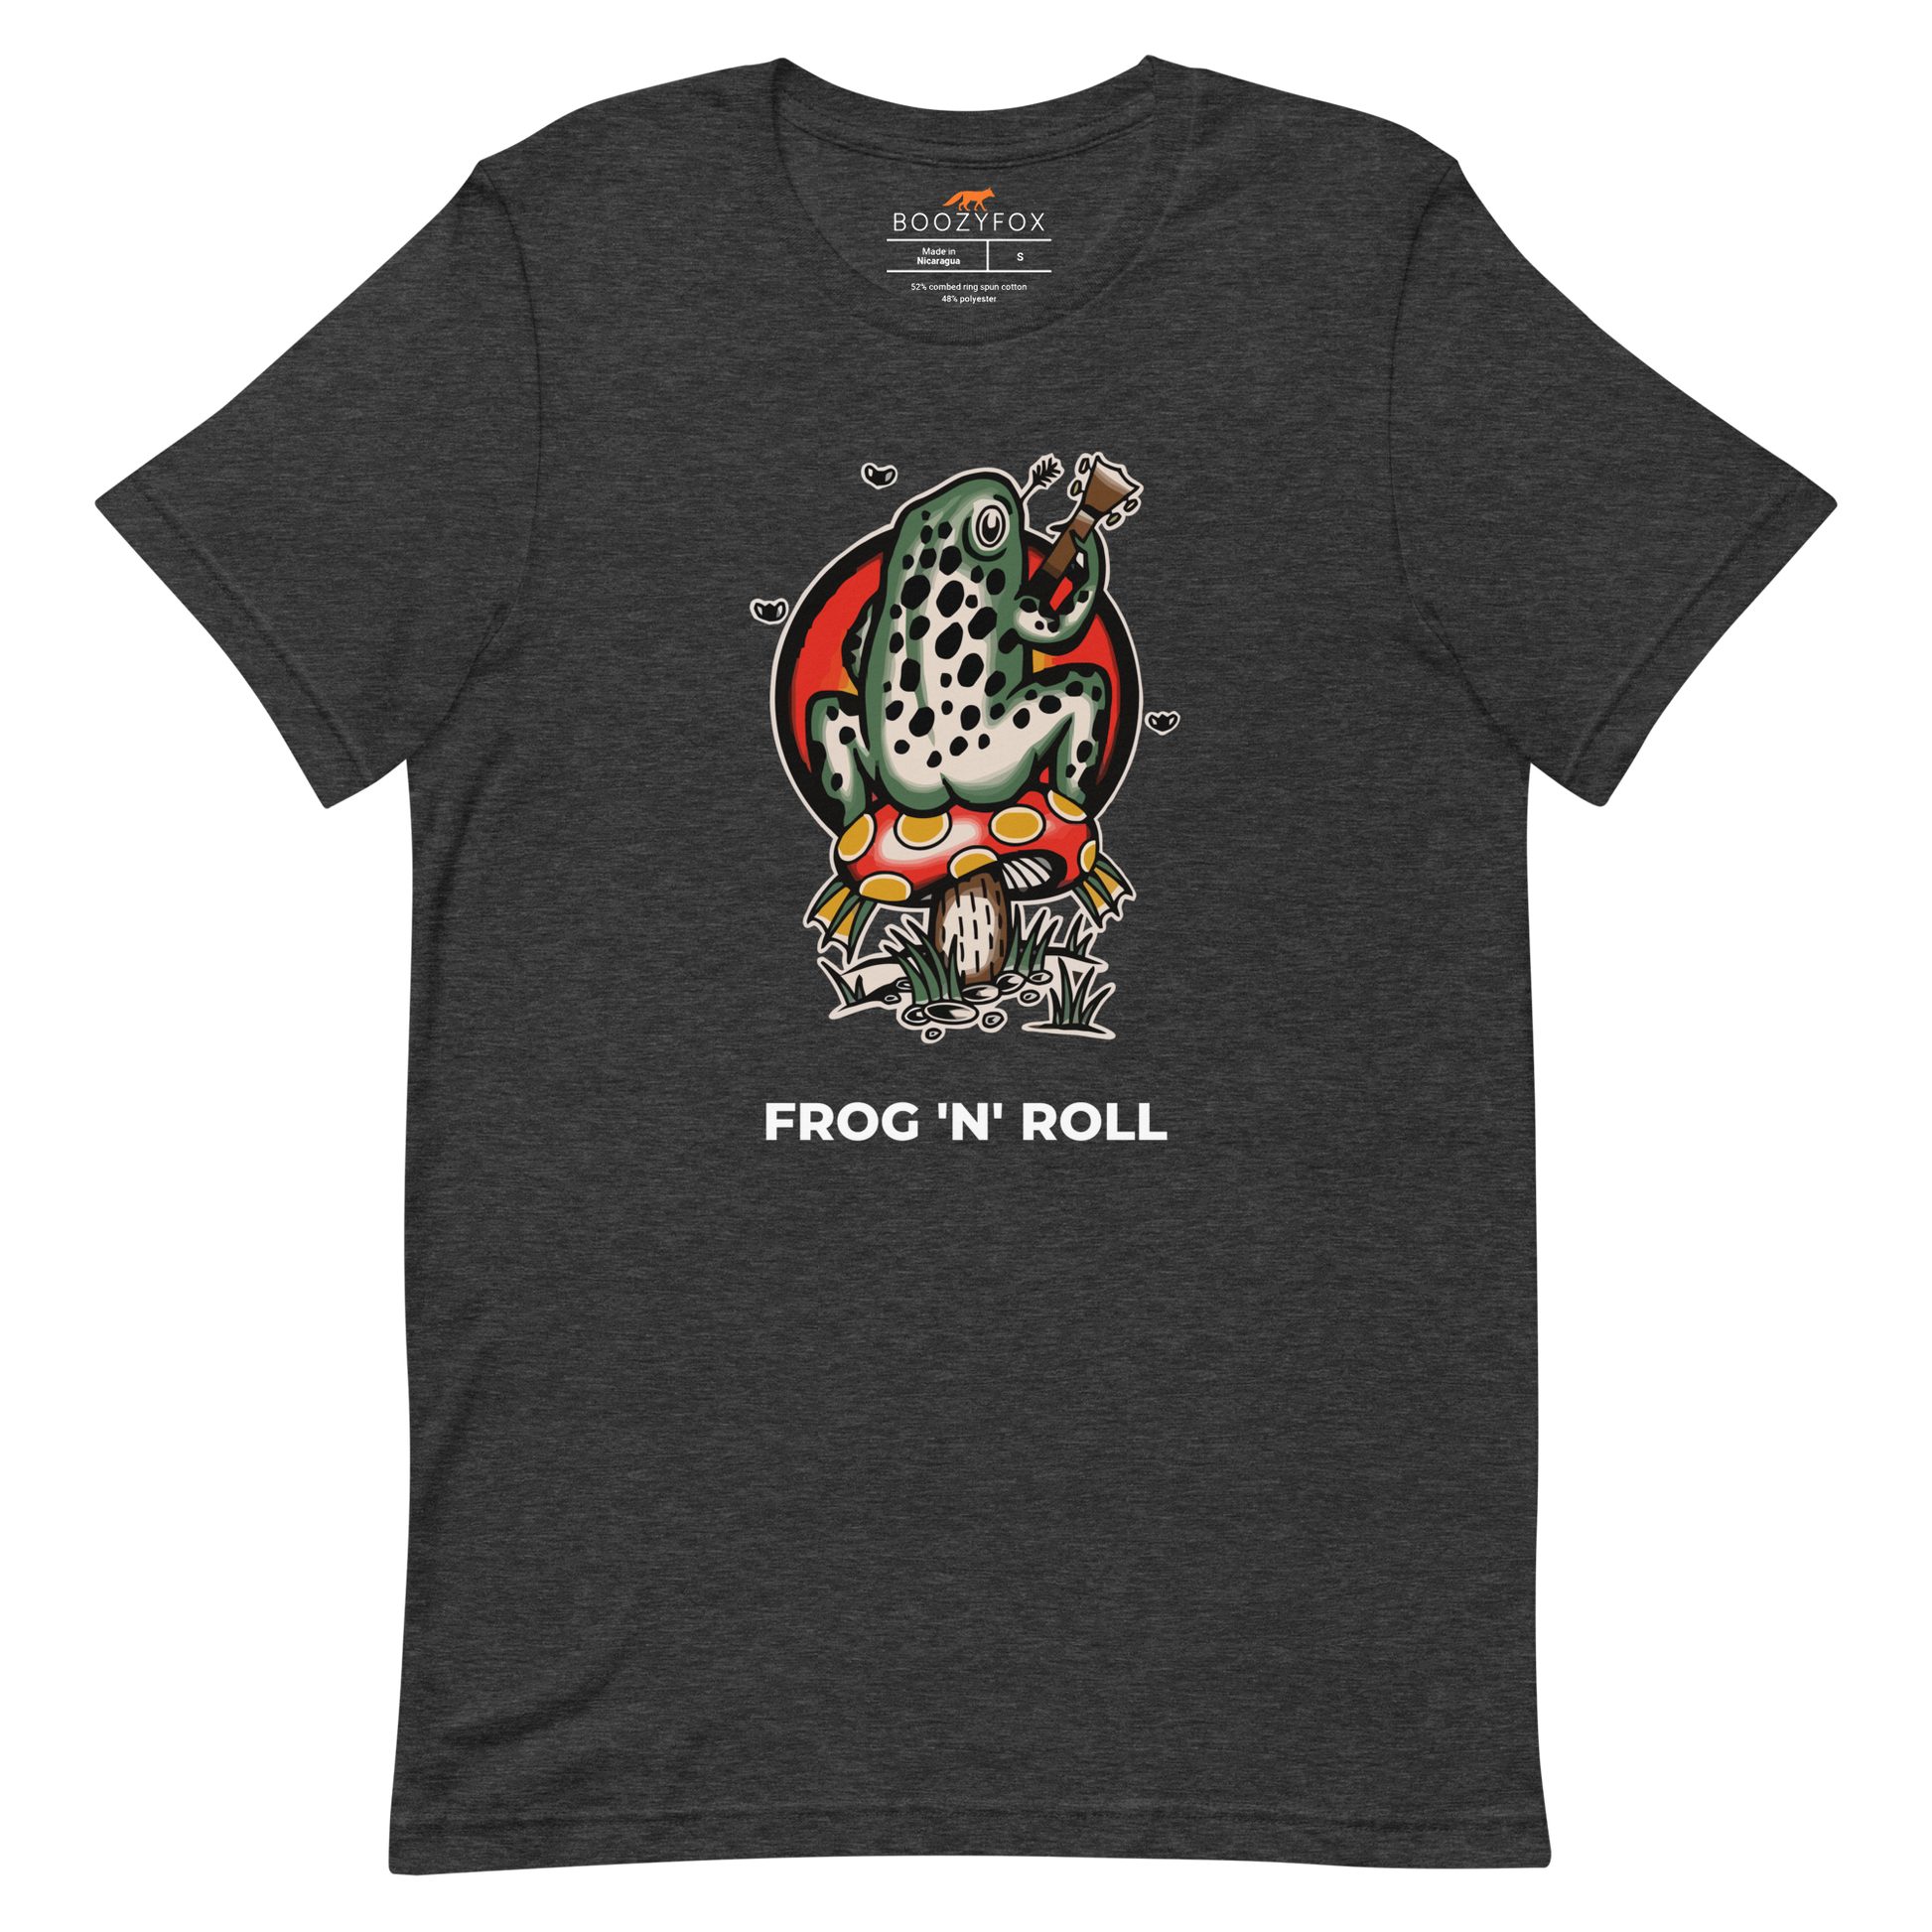 Dark Grey Heather Premium Frog Tee featuring a funny Frog 'n' Roll graphic on the chest - Funny Graphic Frog Tees - Boozy Fox